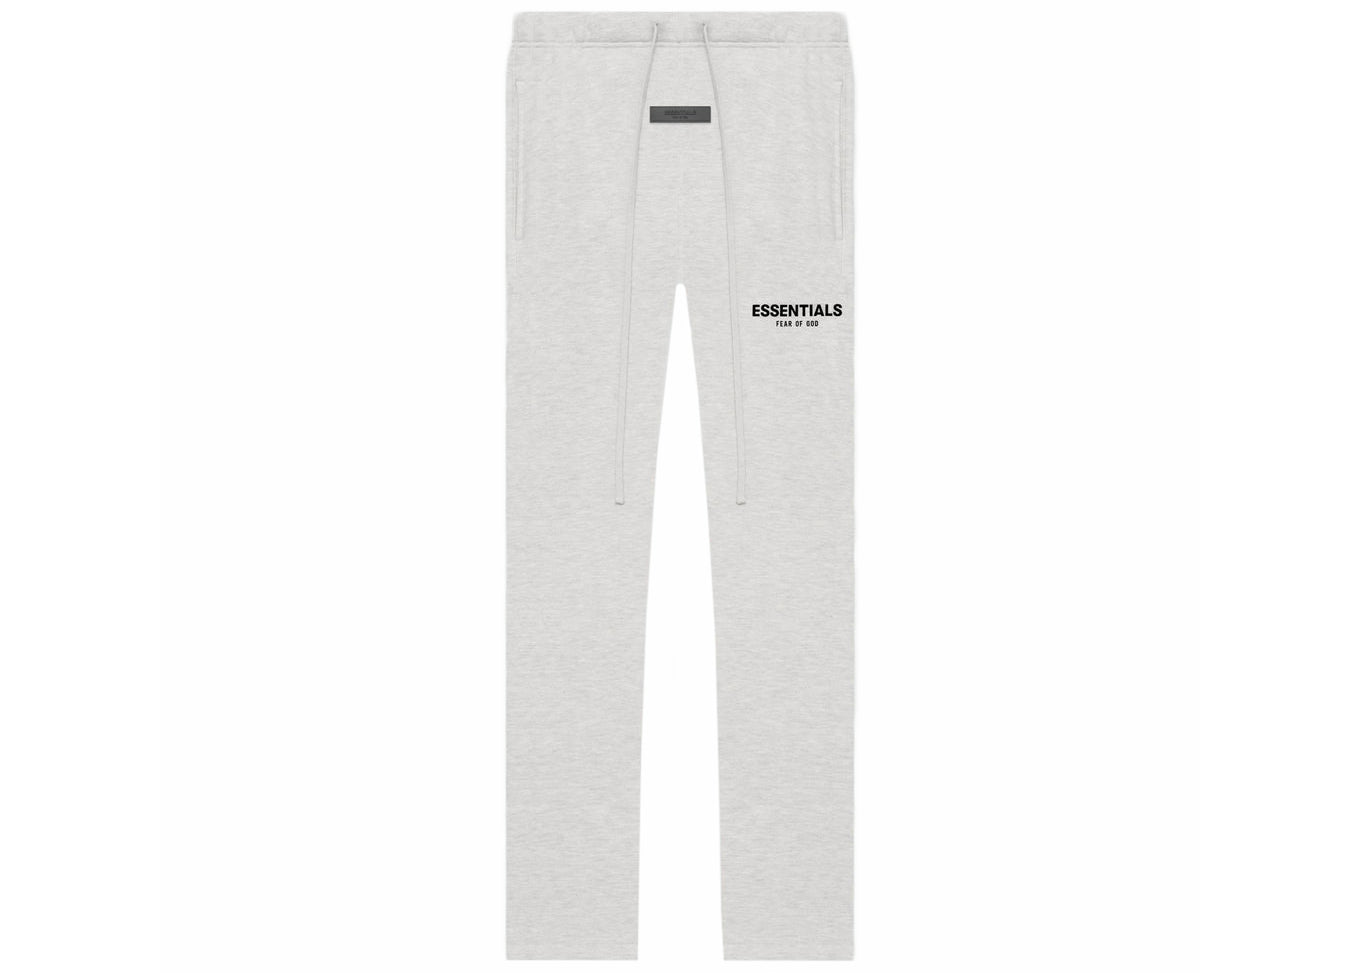 Fear Of God Essentials Relaxed Sweatpants Light Oatmeal (Ss22) - Size: XS